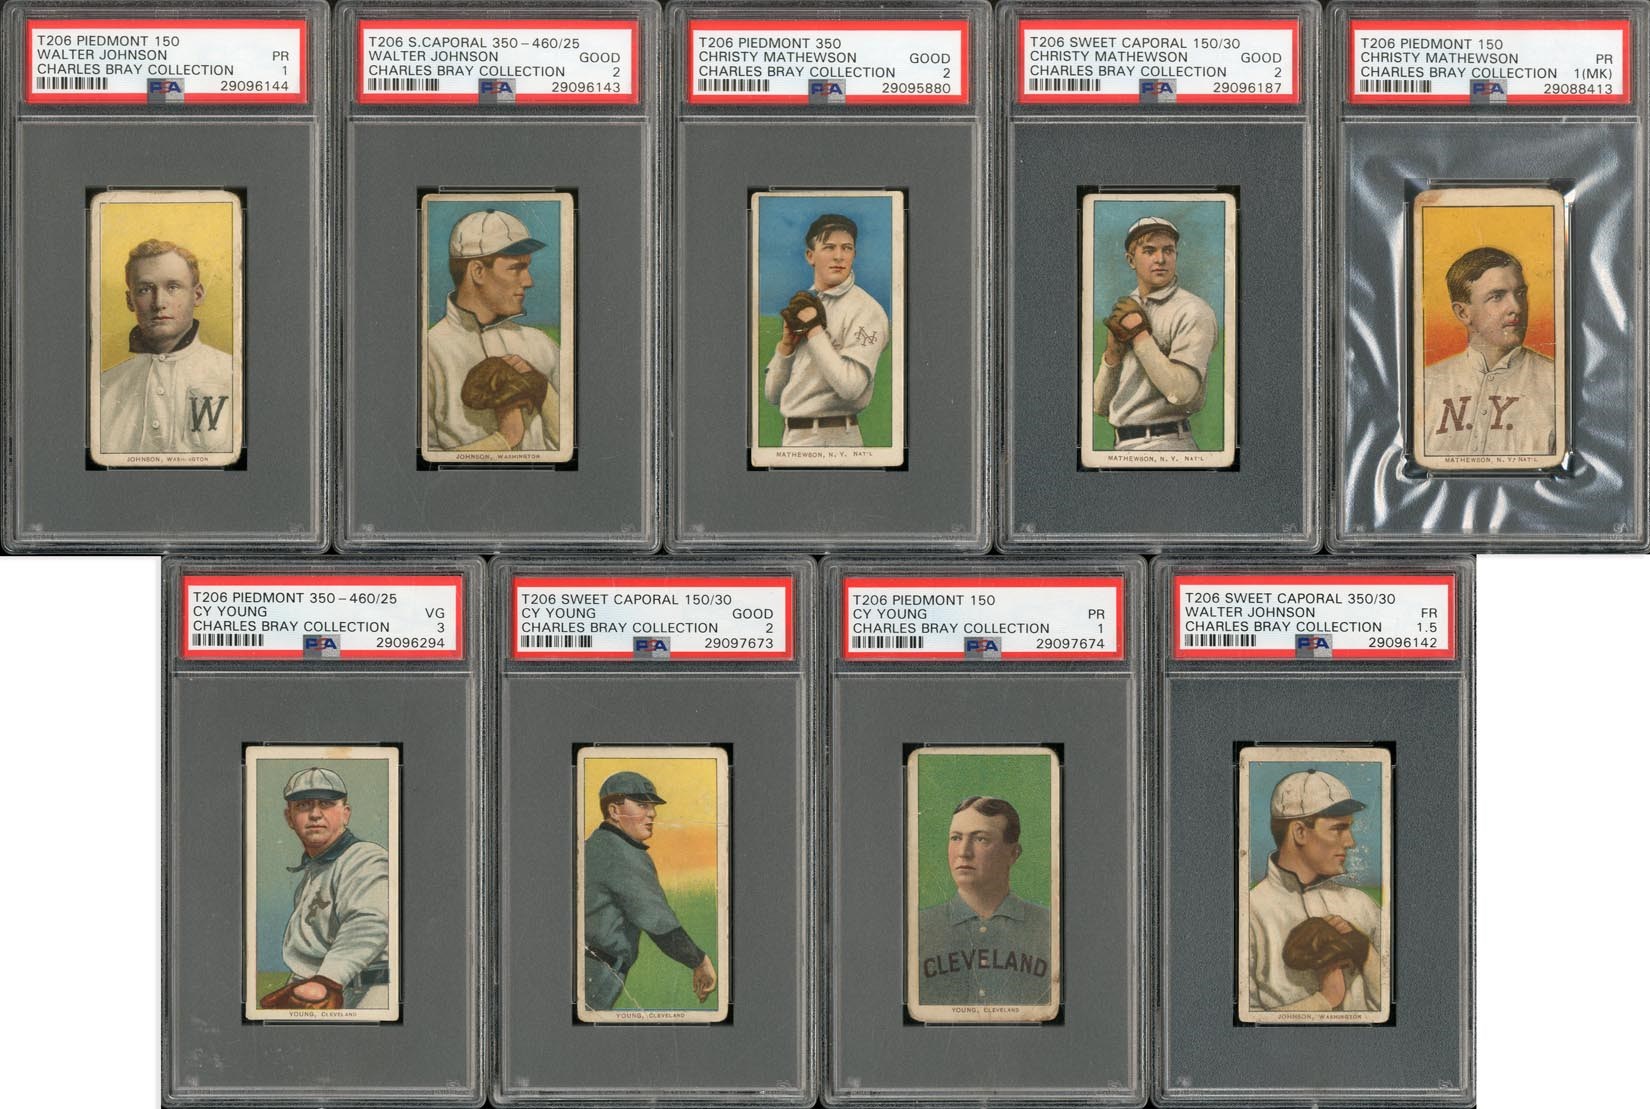 Baseball and Trading Cards - T206 HOFer Pitcher PSA Graded Collection (9) with Mathewson Johnson and Young - The Charles Bray Collection